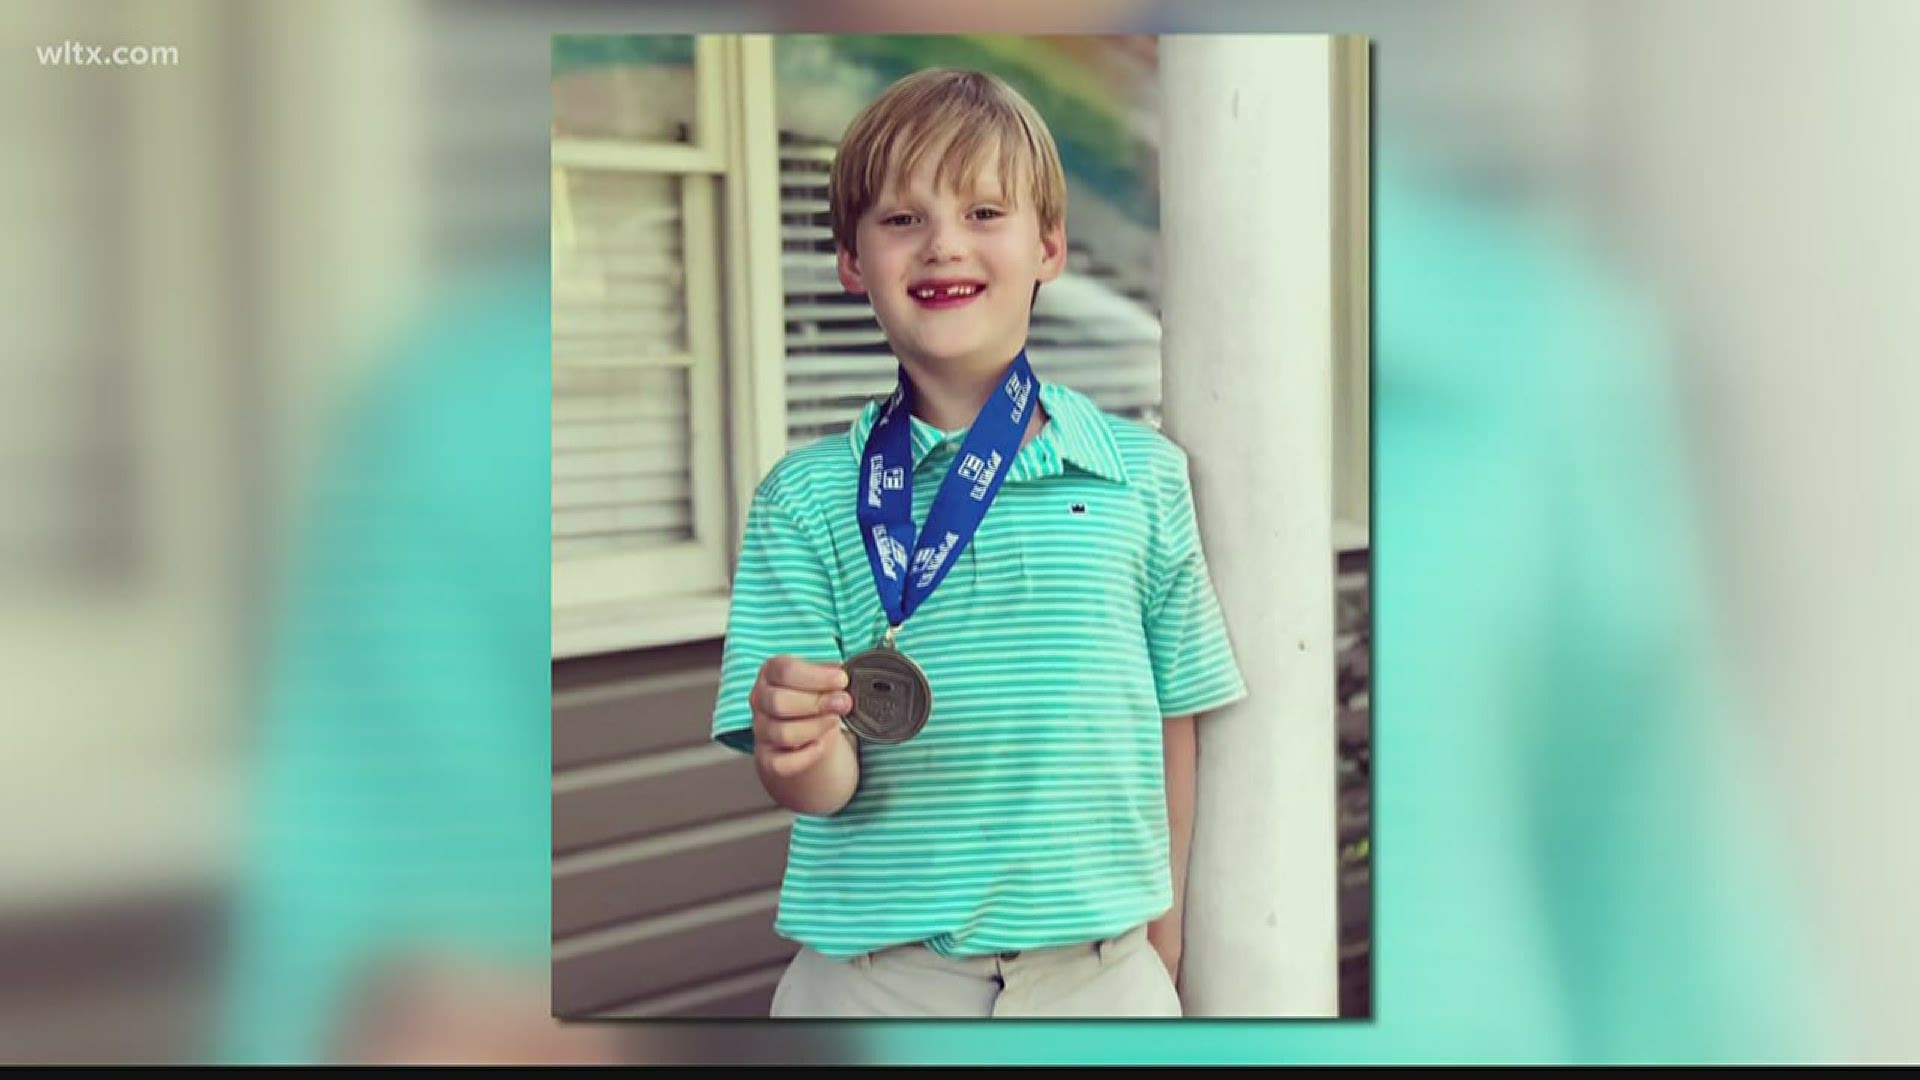 News19's Chandler Mack introduces you to Blake Johnson, a second-grader who won the U.S. Kids Golf Tournament.